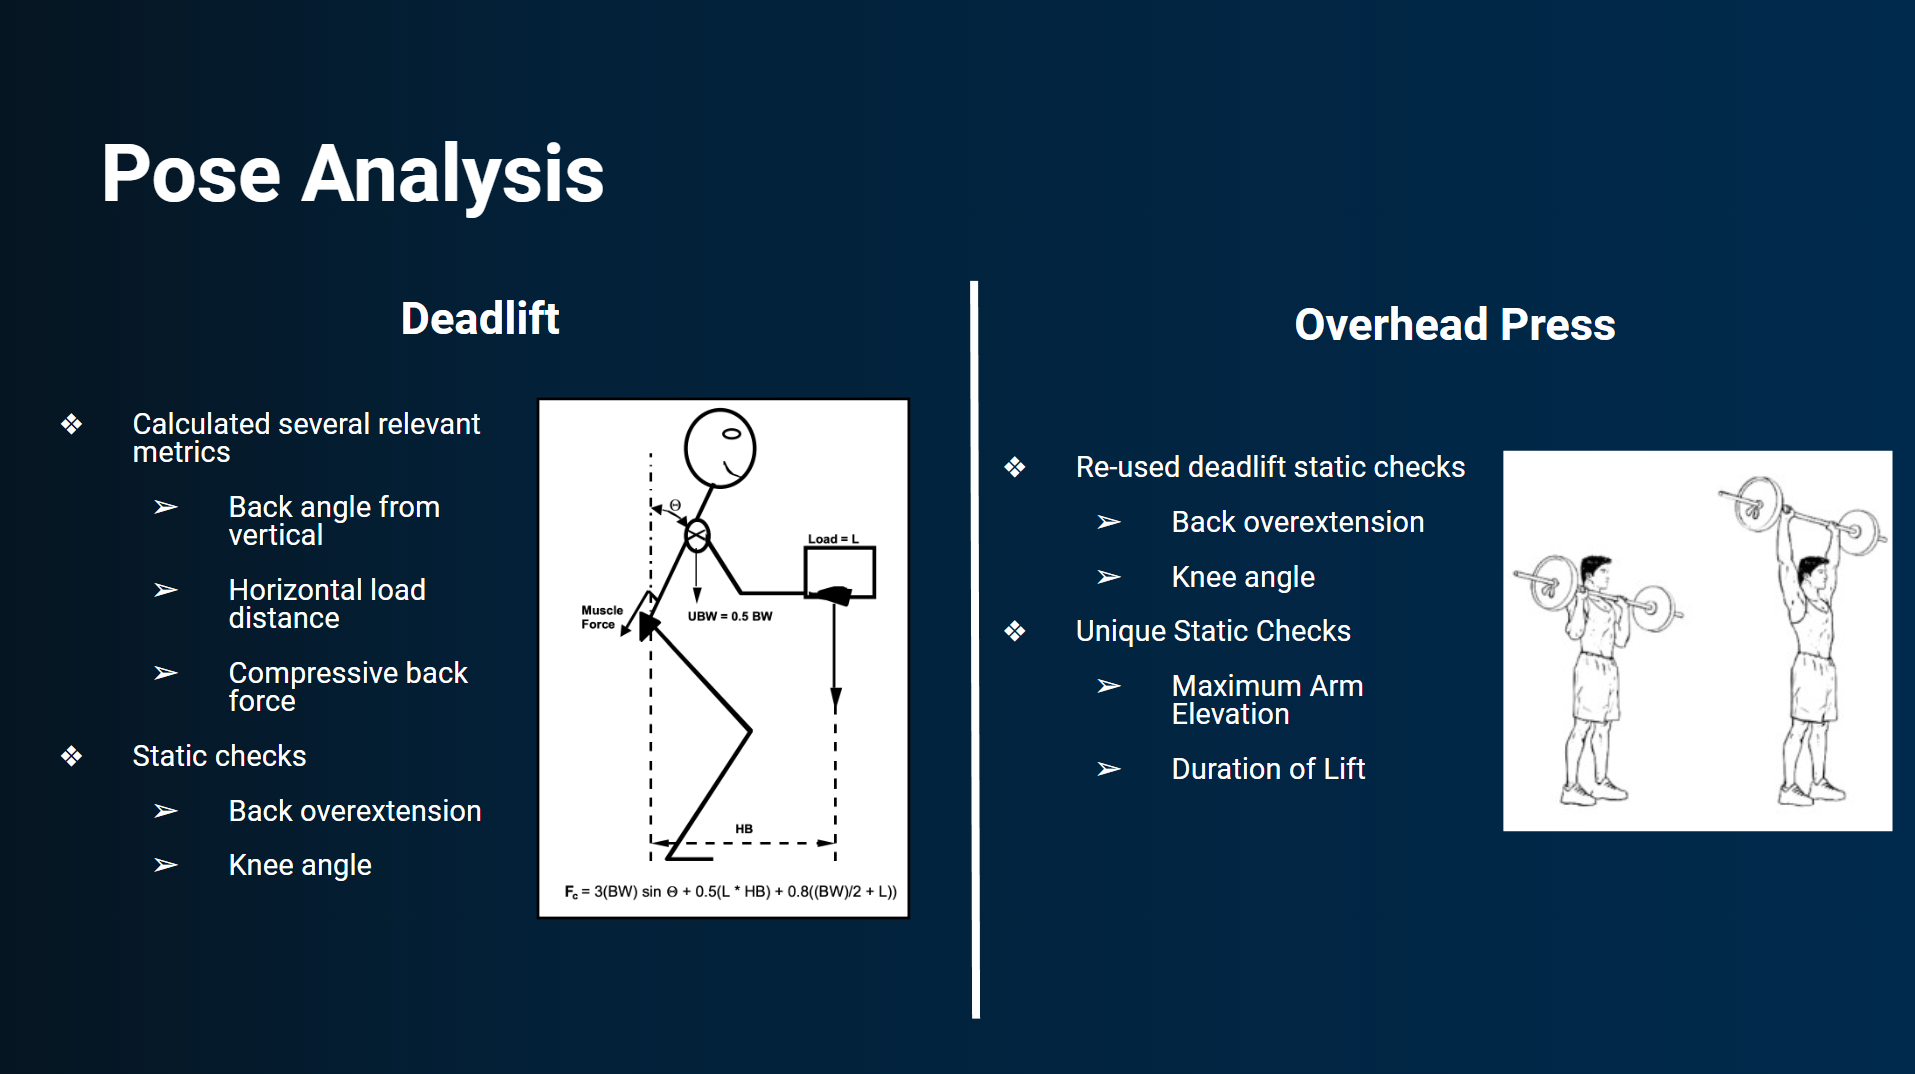 The image shows how the team is analyzing the two different lifts: deadlift and overhead press. 